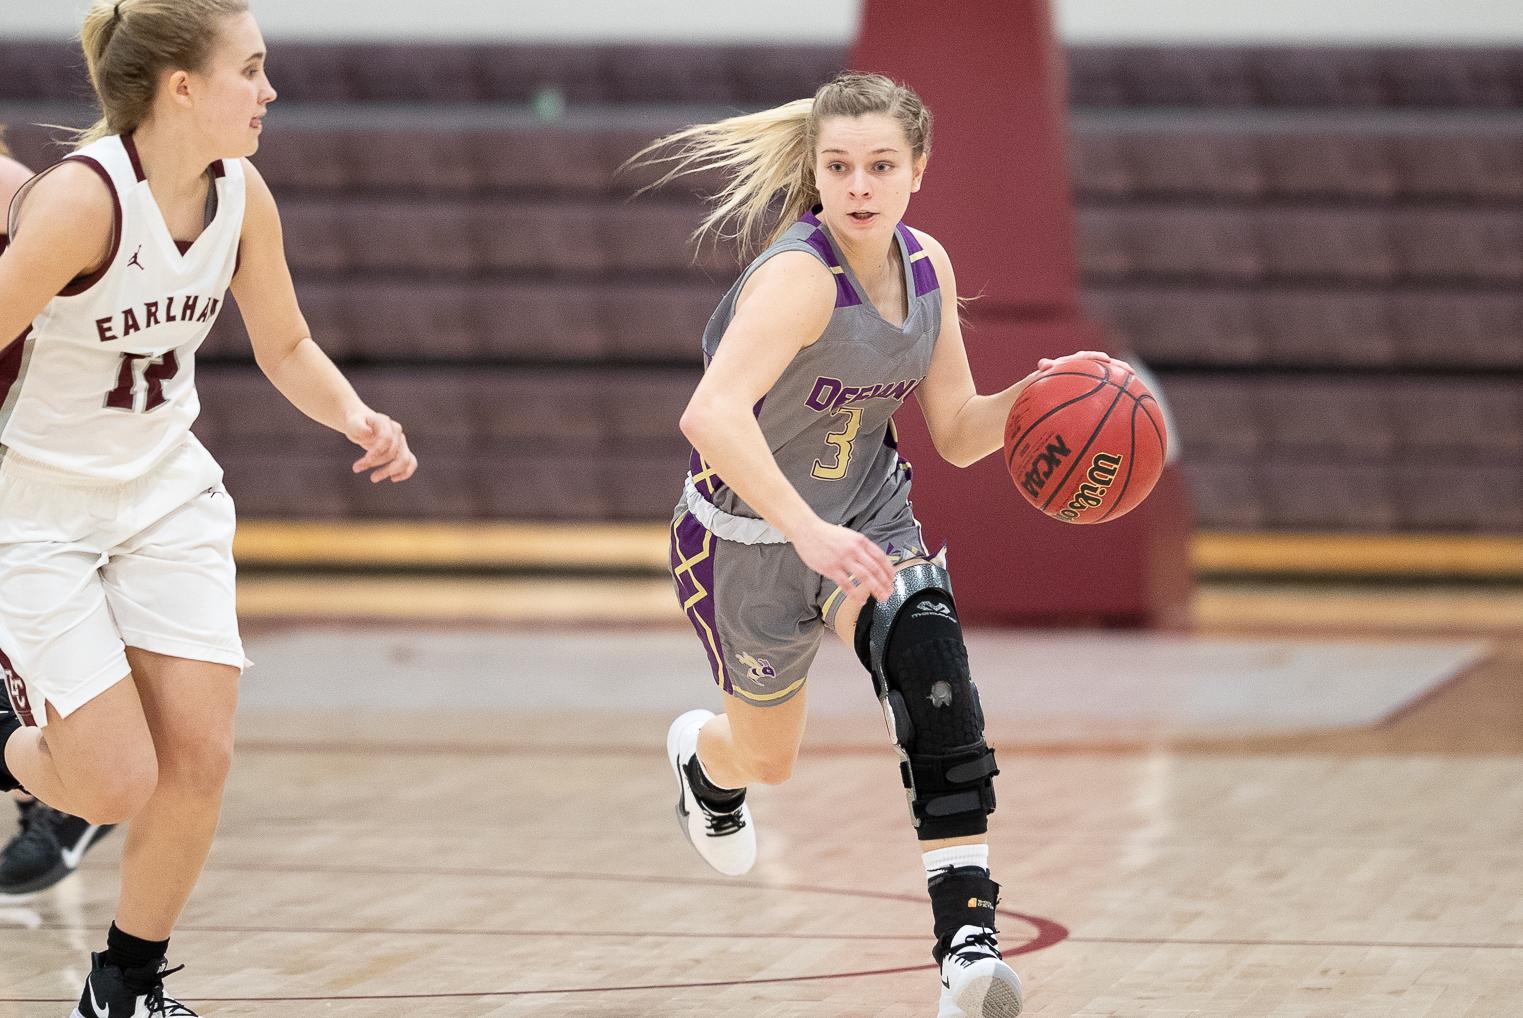 Women's basketball splits season series with Earlham after road defeat